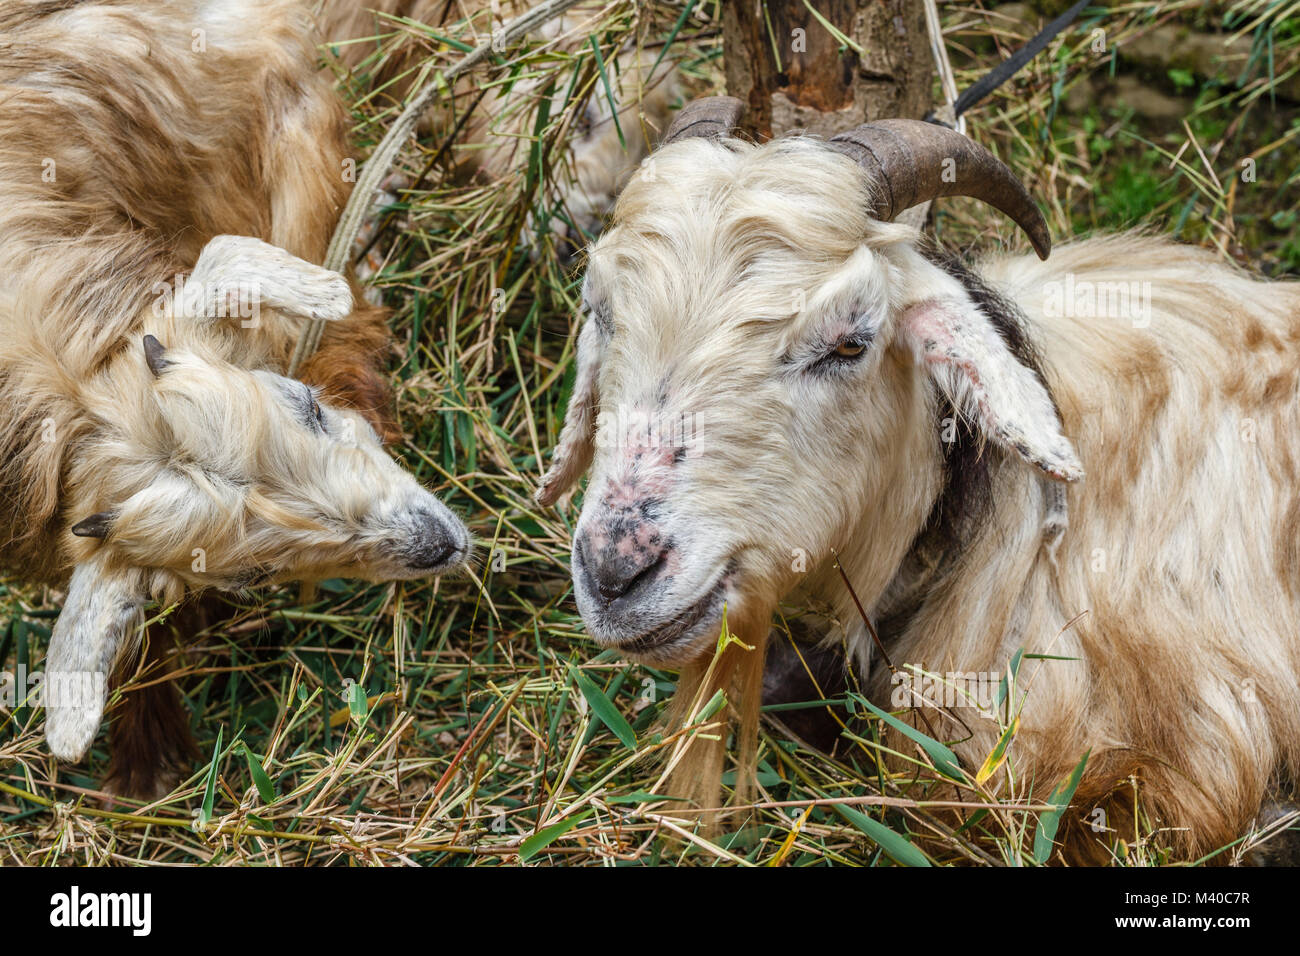 Sheep (ewe and its lamb) eating grass in the mountain village in Himalayas, Nepal. Portrait image. Stock Photo